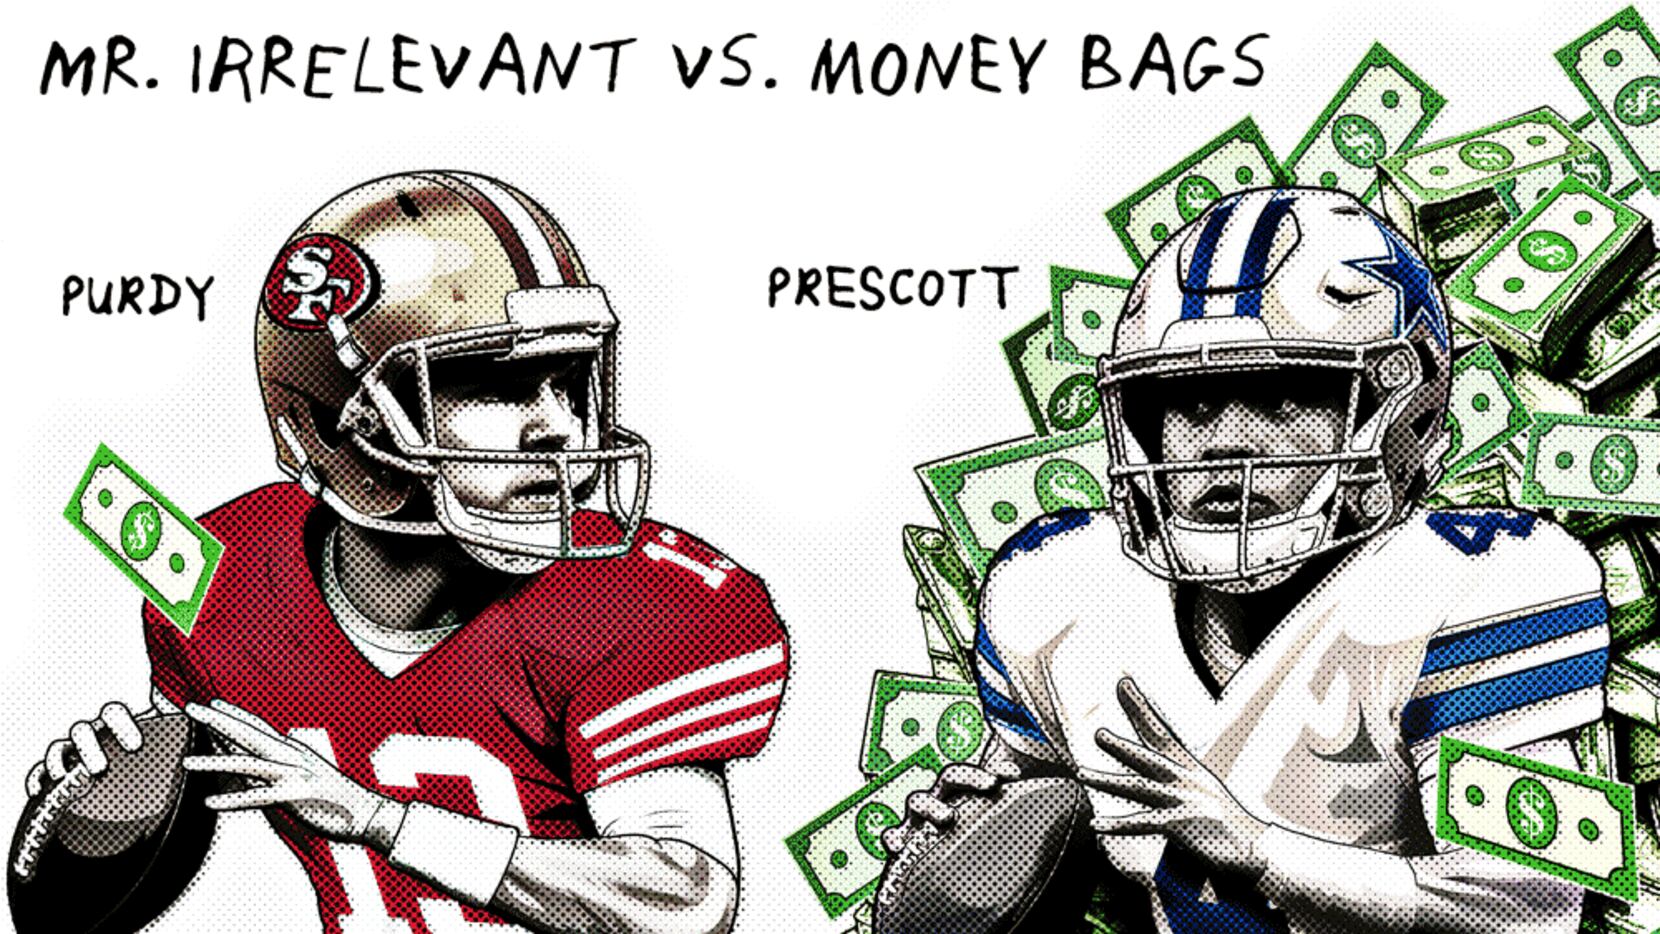 San Francisco 49ers Game-by-Game Predictions